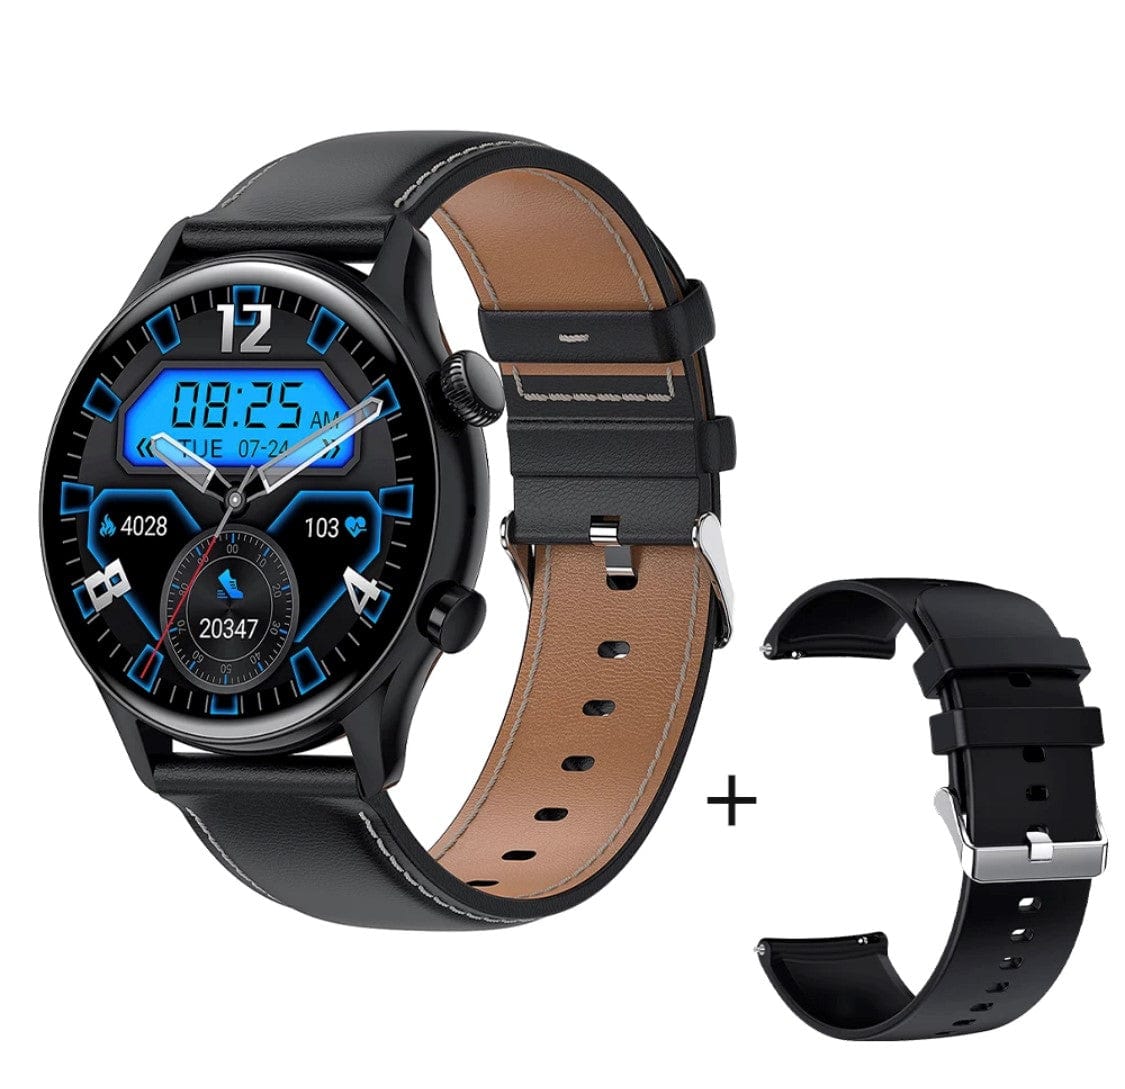 Smart Watch South Africa Watches Black Smartoby Amoled SK8 Pro Smart Watch Black --Extra leather Strap included